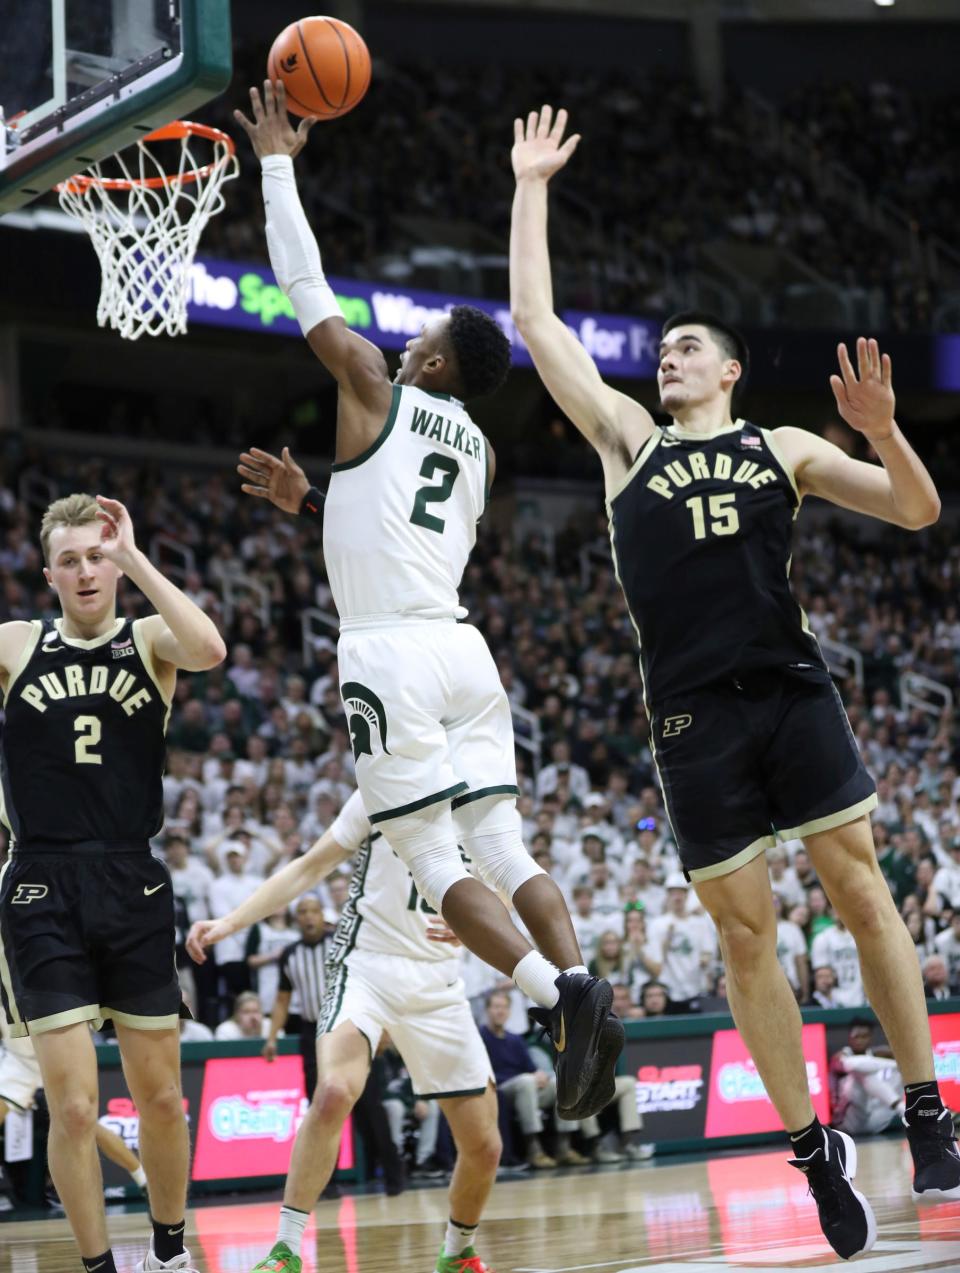 Michigan State guard Tyson Walker scores against Purdue Boilermakers center Zach Edey during the second half Monday, Jan. 16, 2023 at Breslin Center in East Lansing.